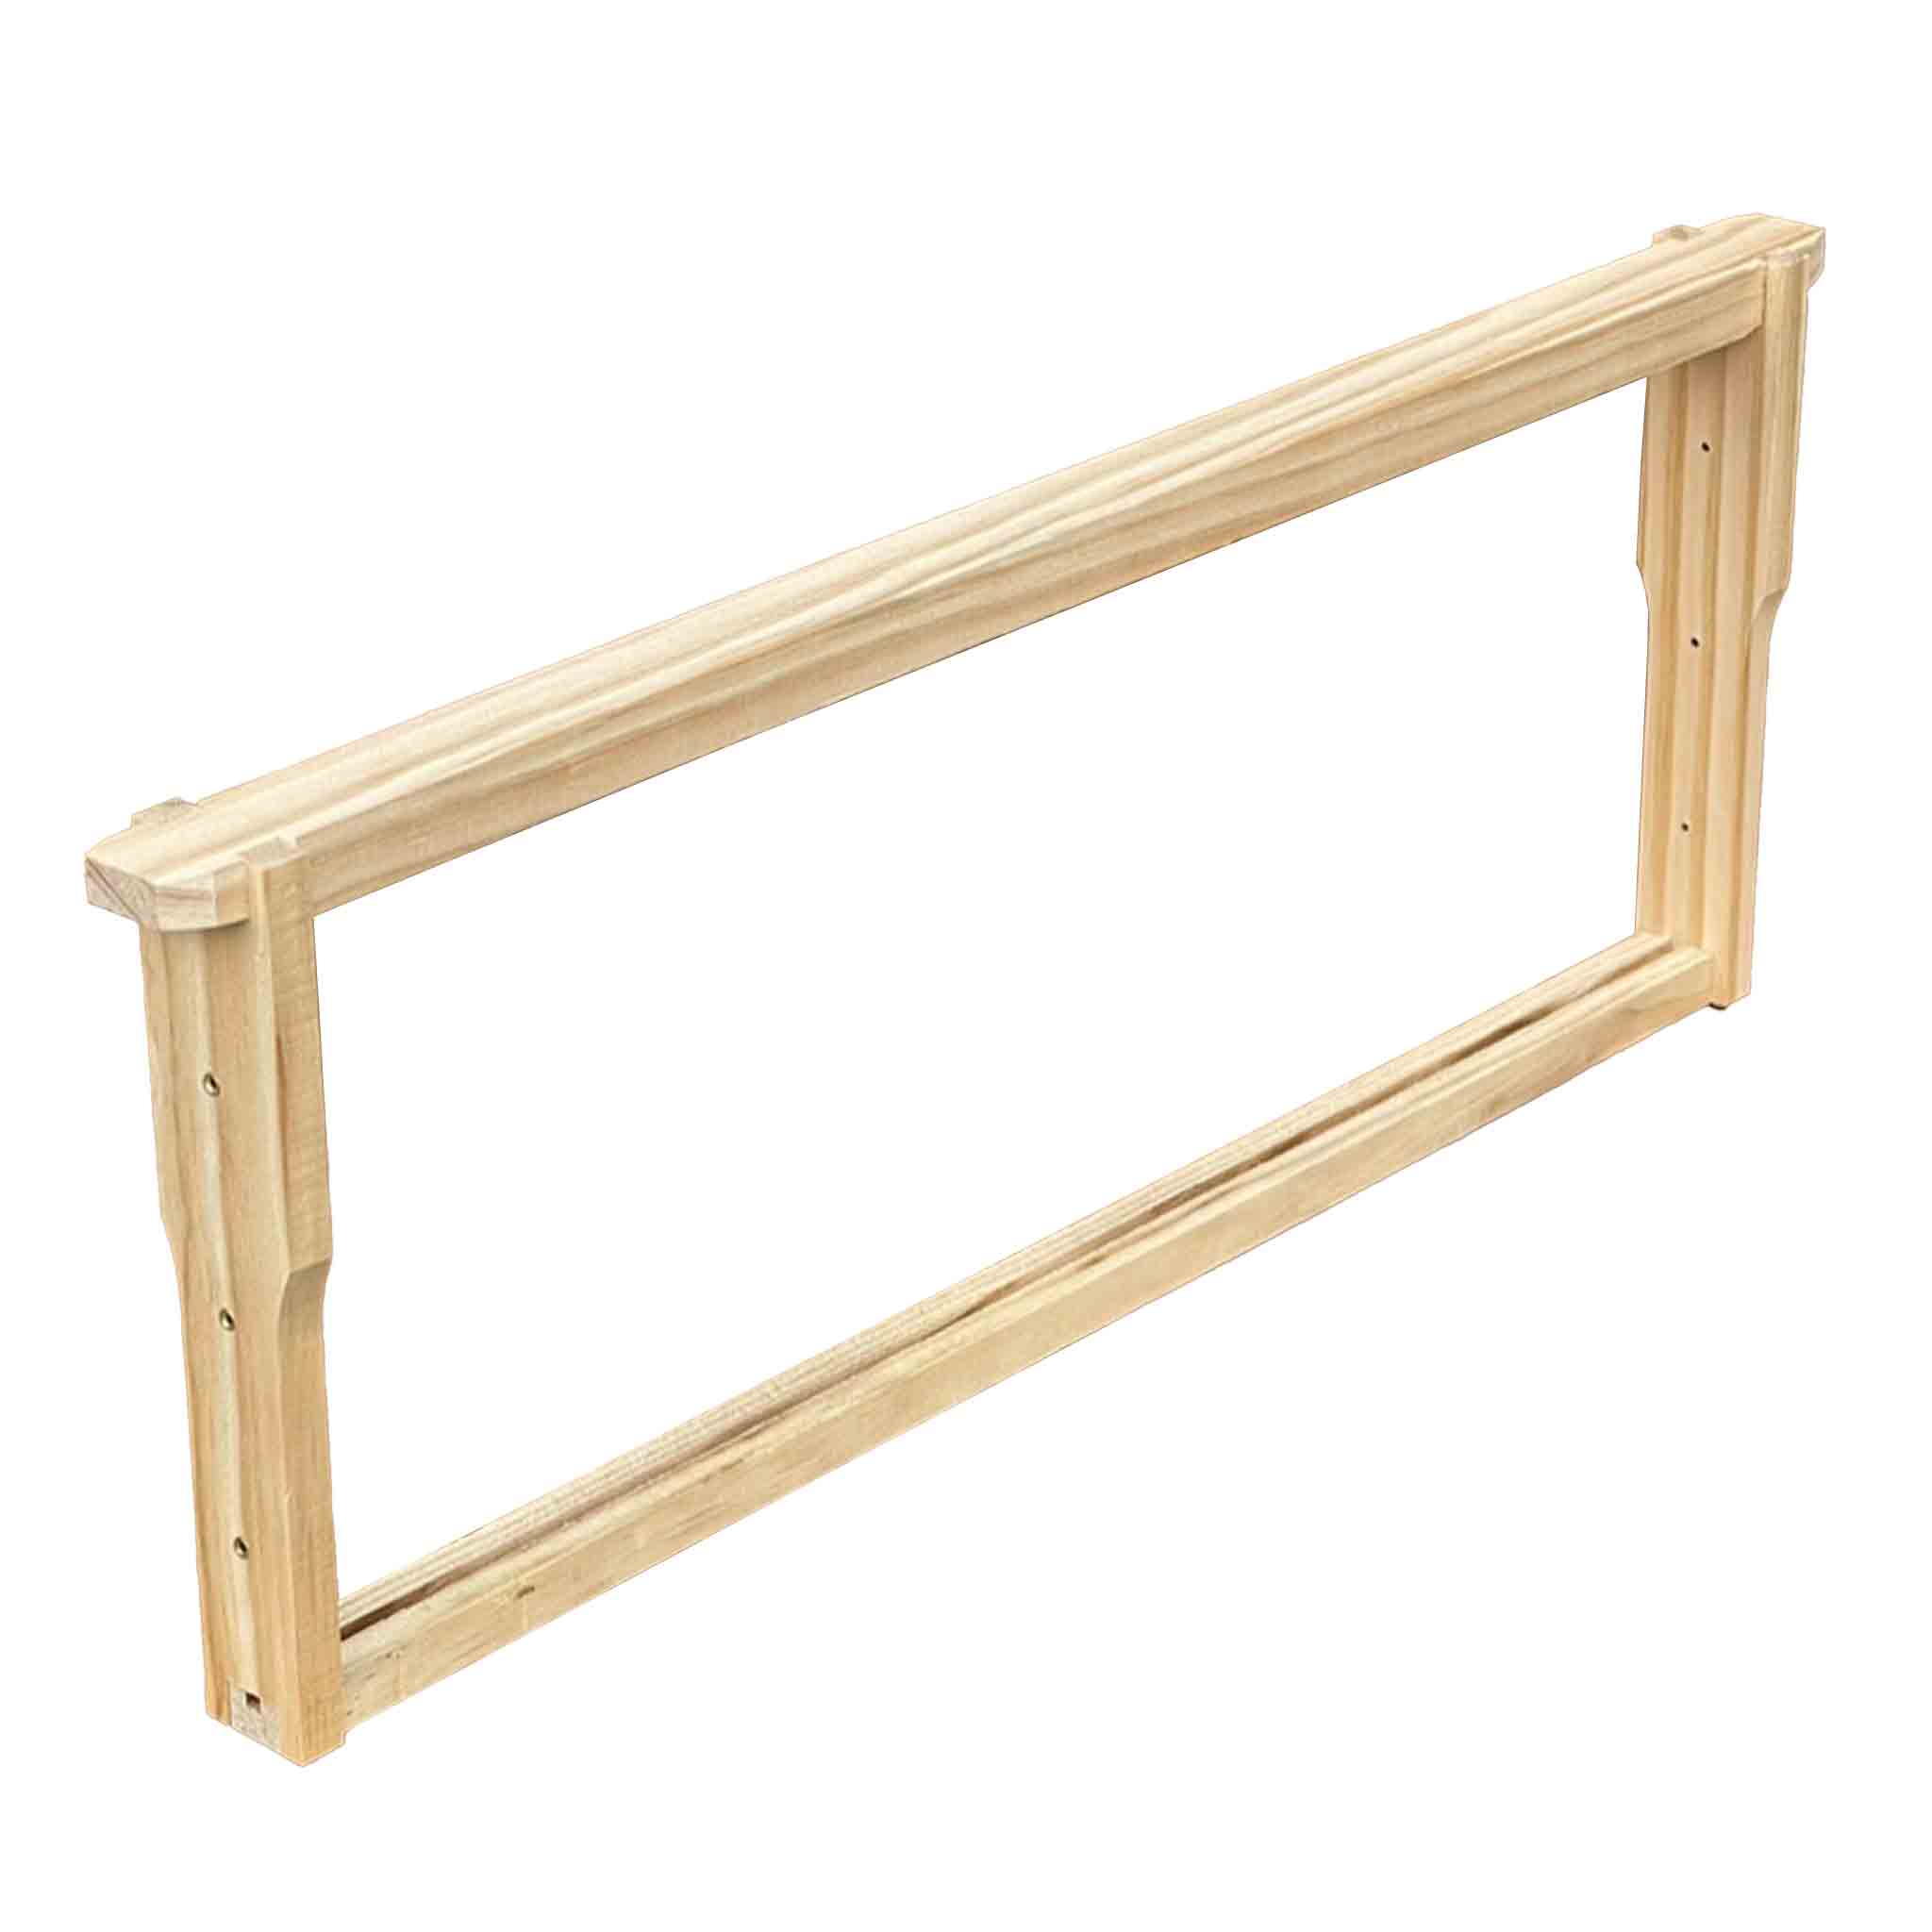 Premium Wooden WSP Beekeeping Frames - Hive Parts collection by Buzzbee Beekeeping Supplies